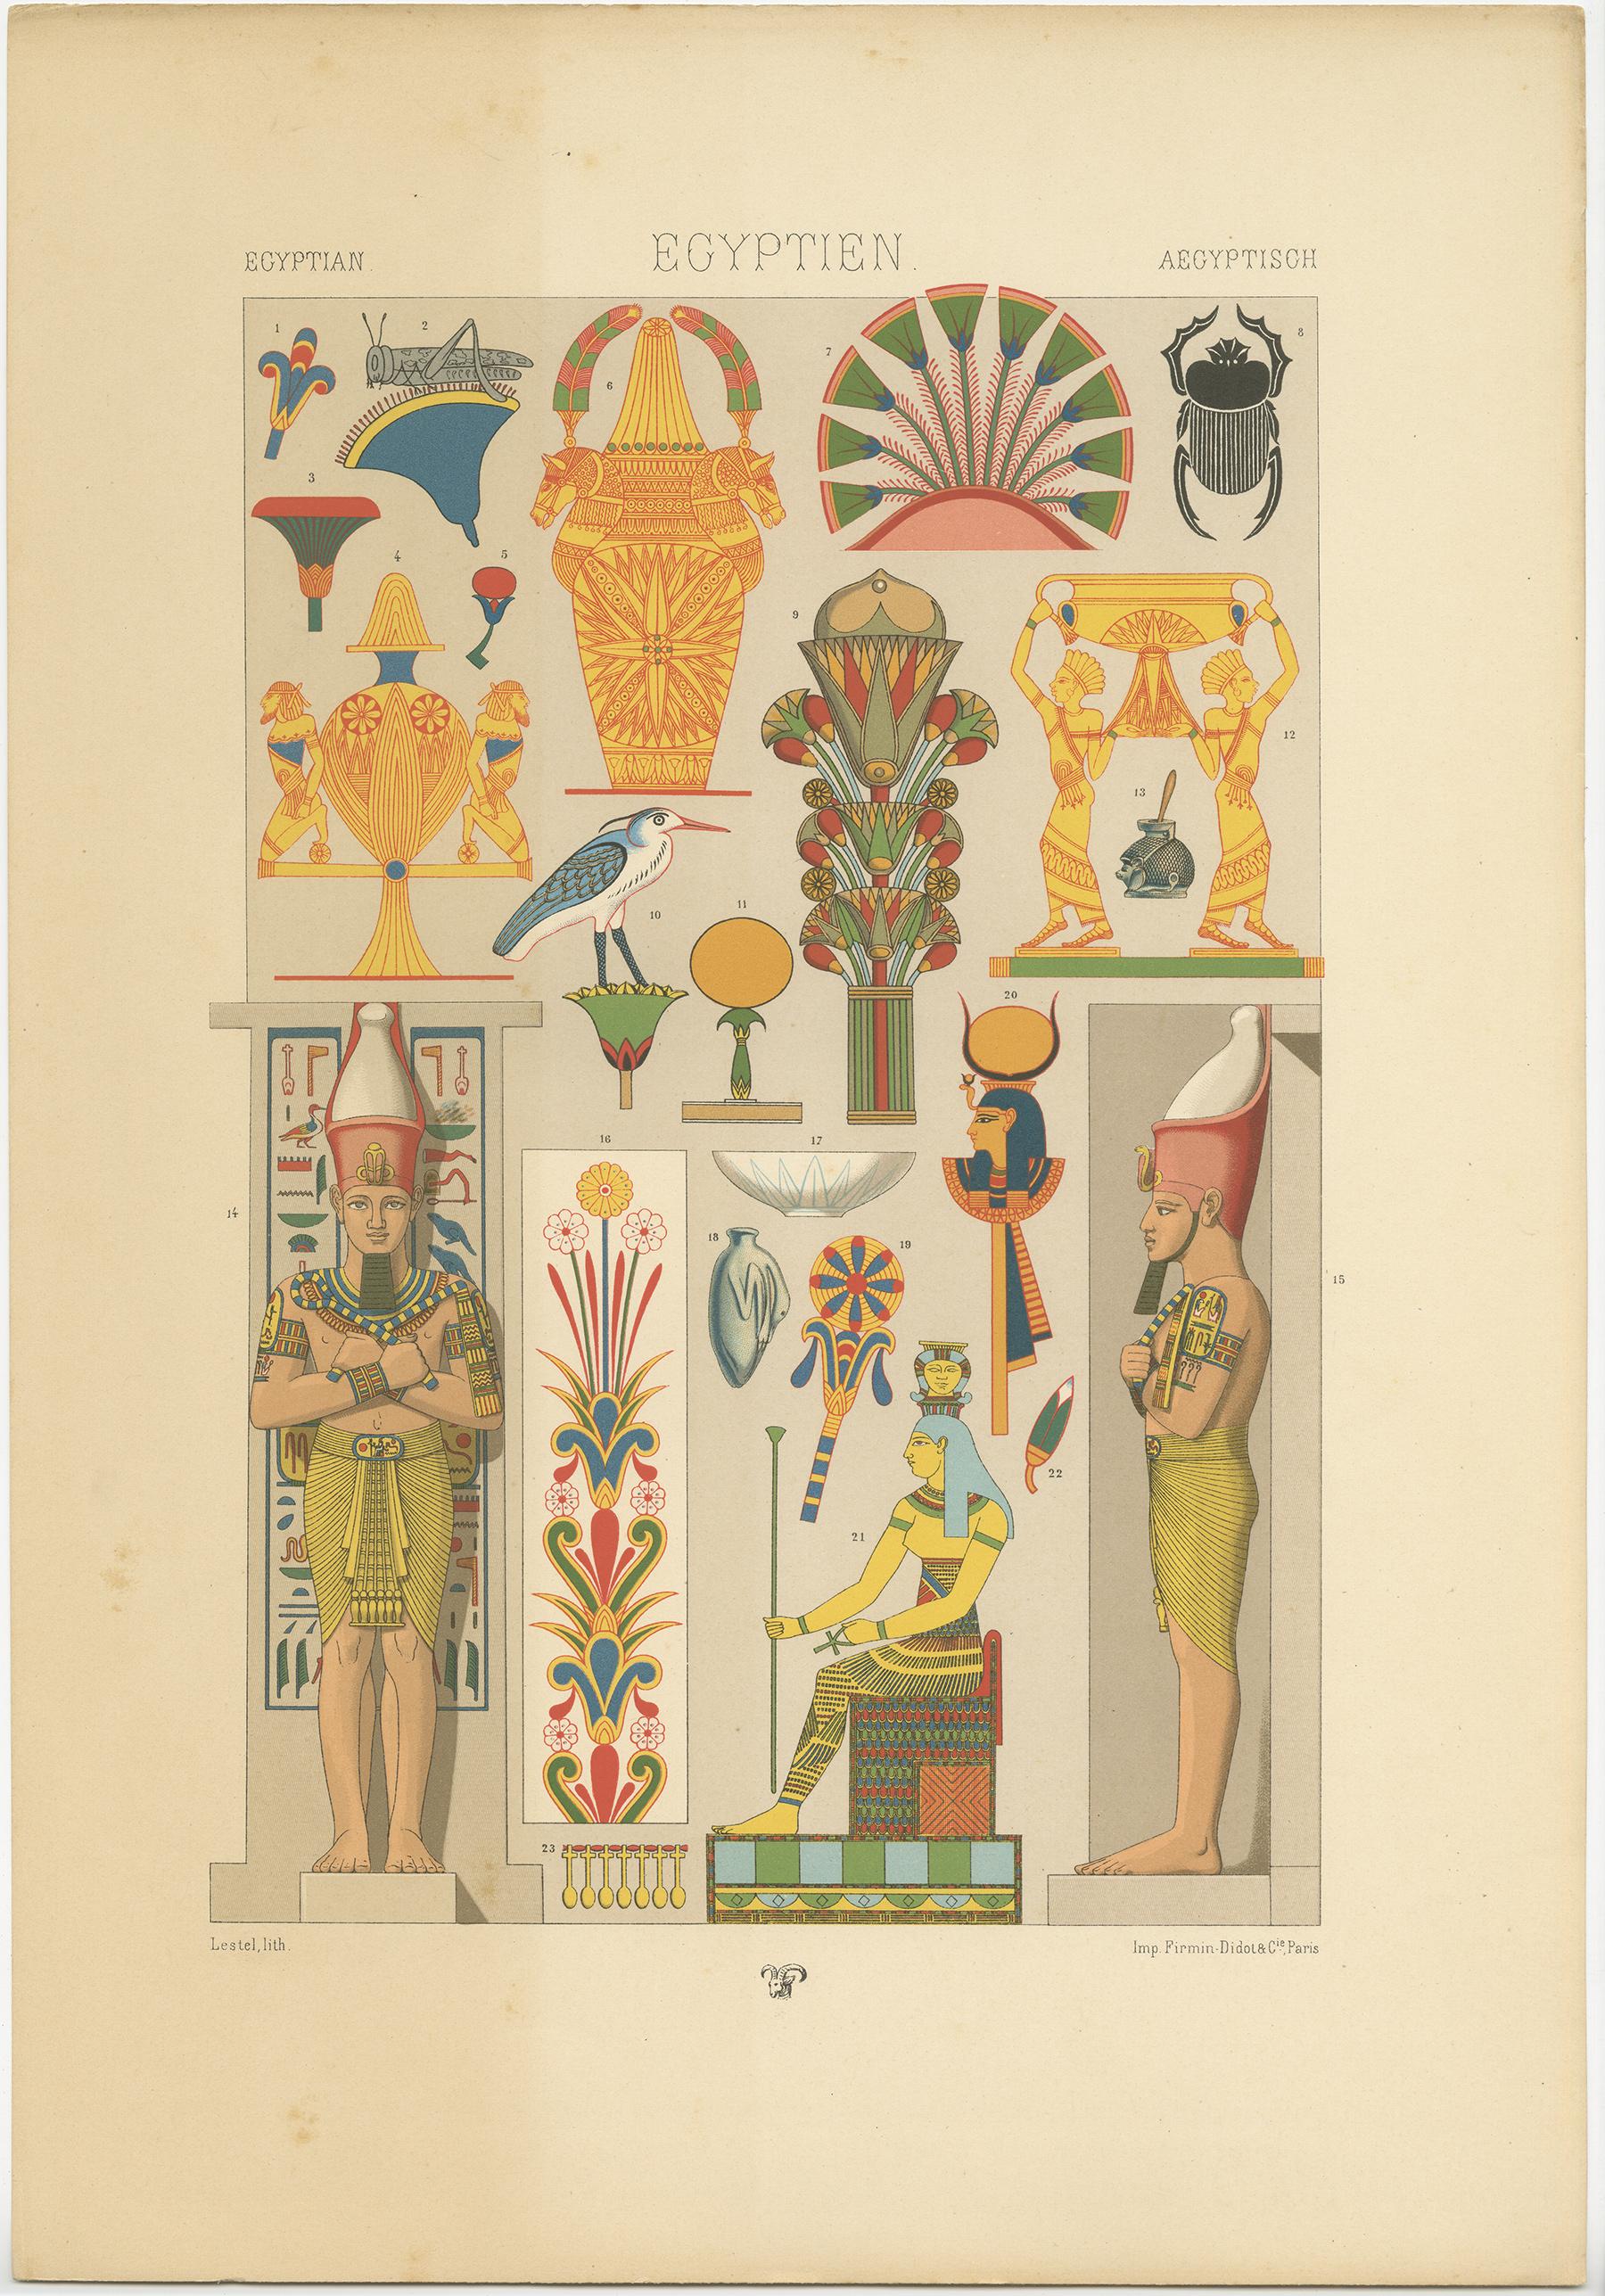 Antique print titled 'Egyptian - Egyptien - Aegyptisch'. Chromolithograph of Egyptian motifs from murals and reliefs and various objects ornaments. This print originates from 'l'Ornement Polychrome' by Auguste Racinet. Published circa 1890.